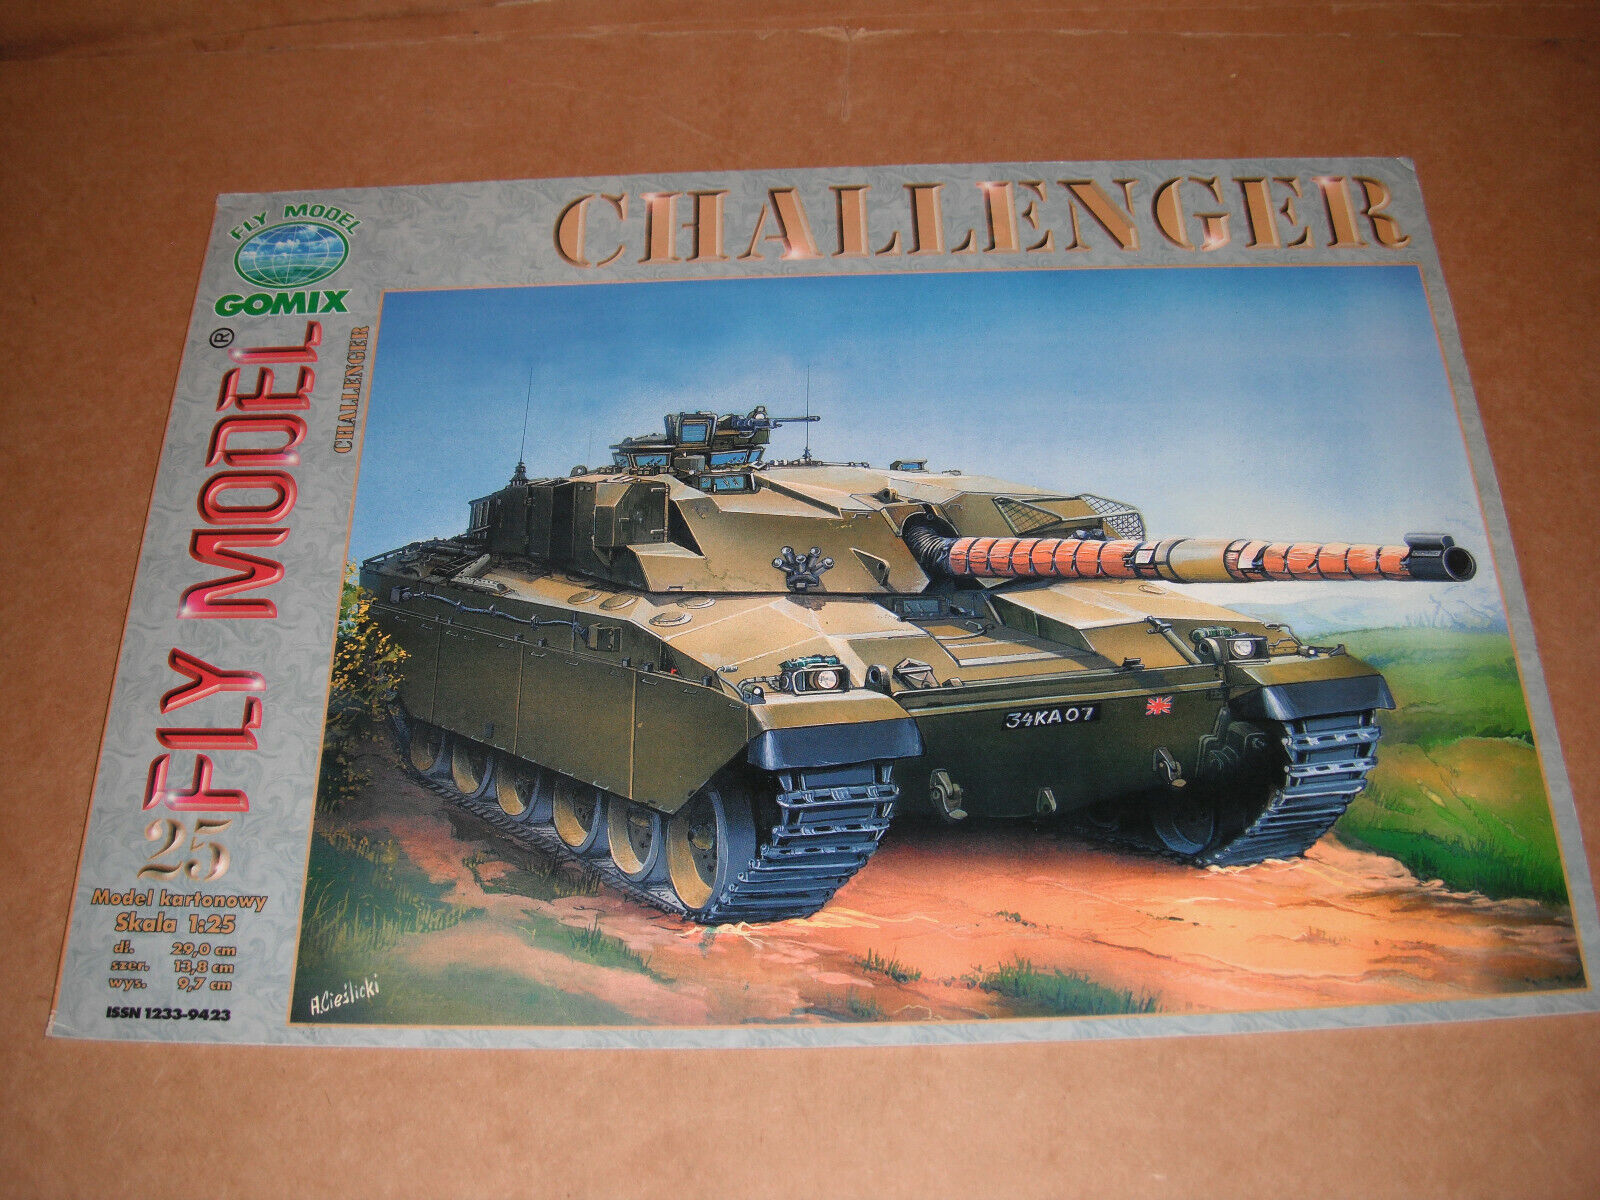 Paper Card Model - Challenger - by Fly Model Gomix